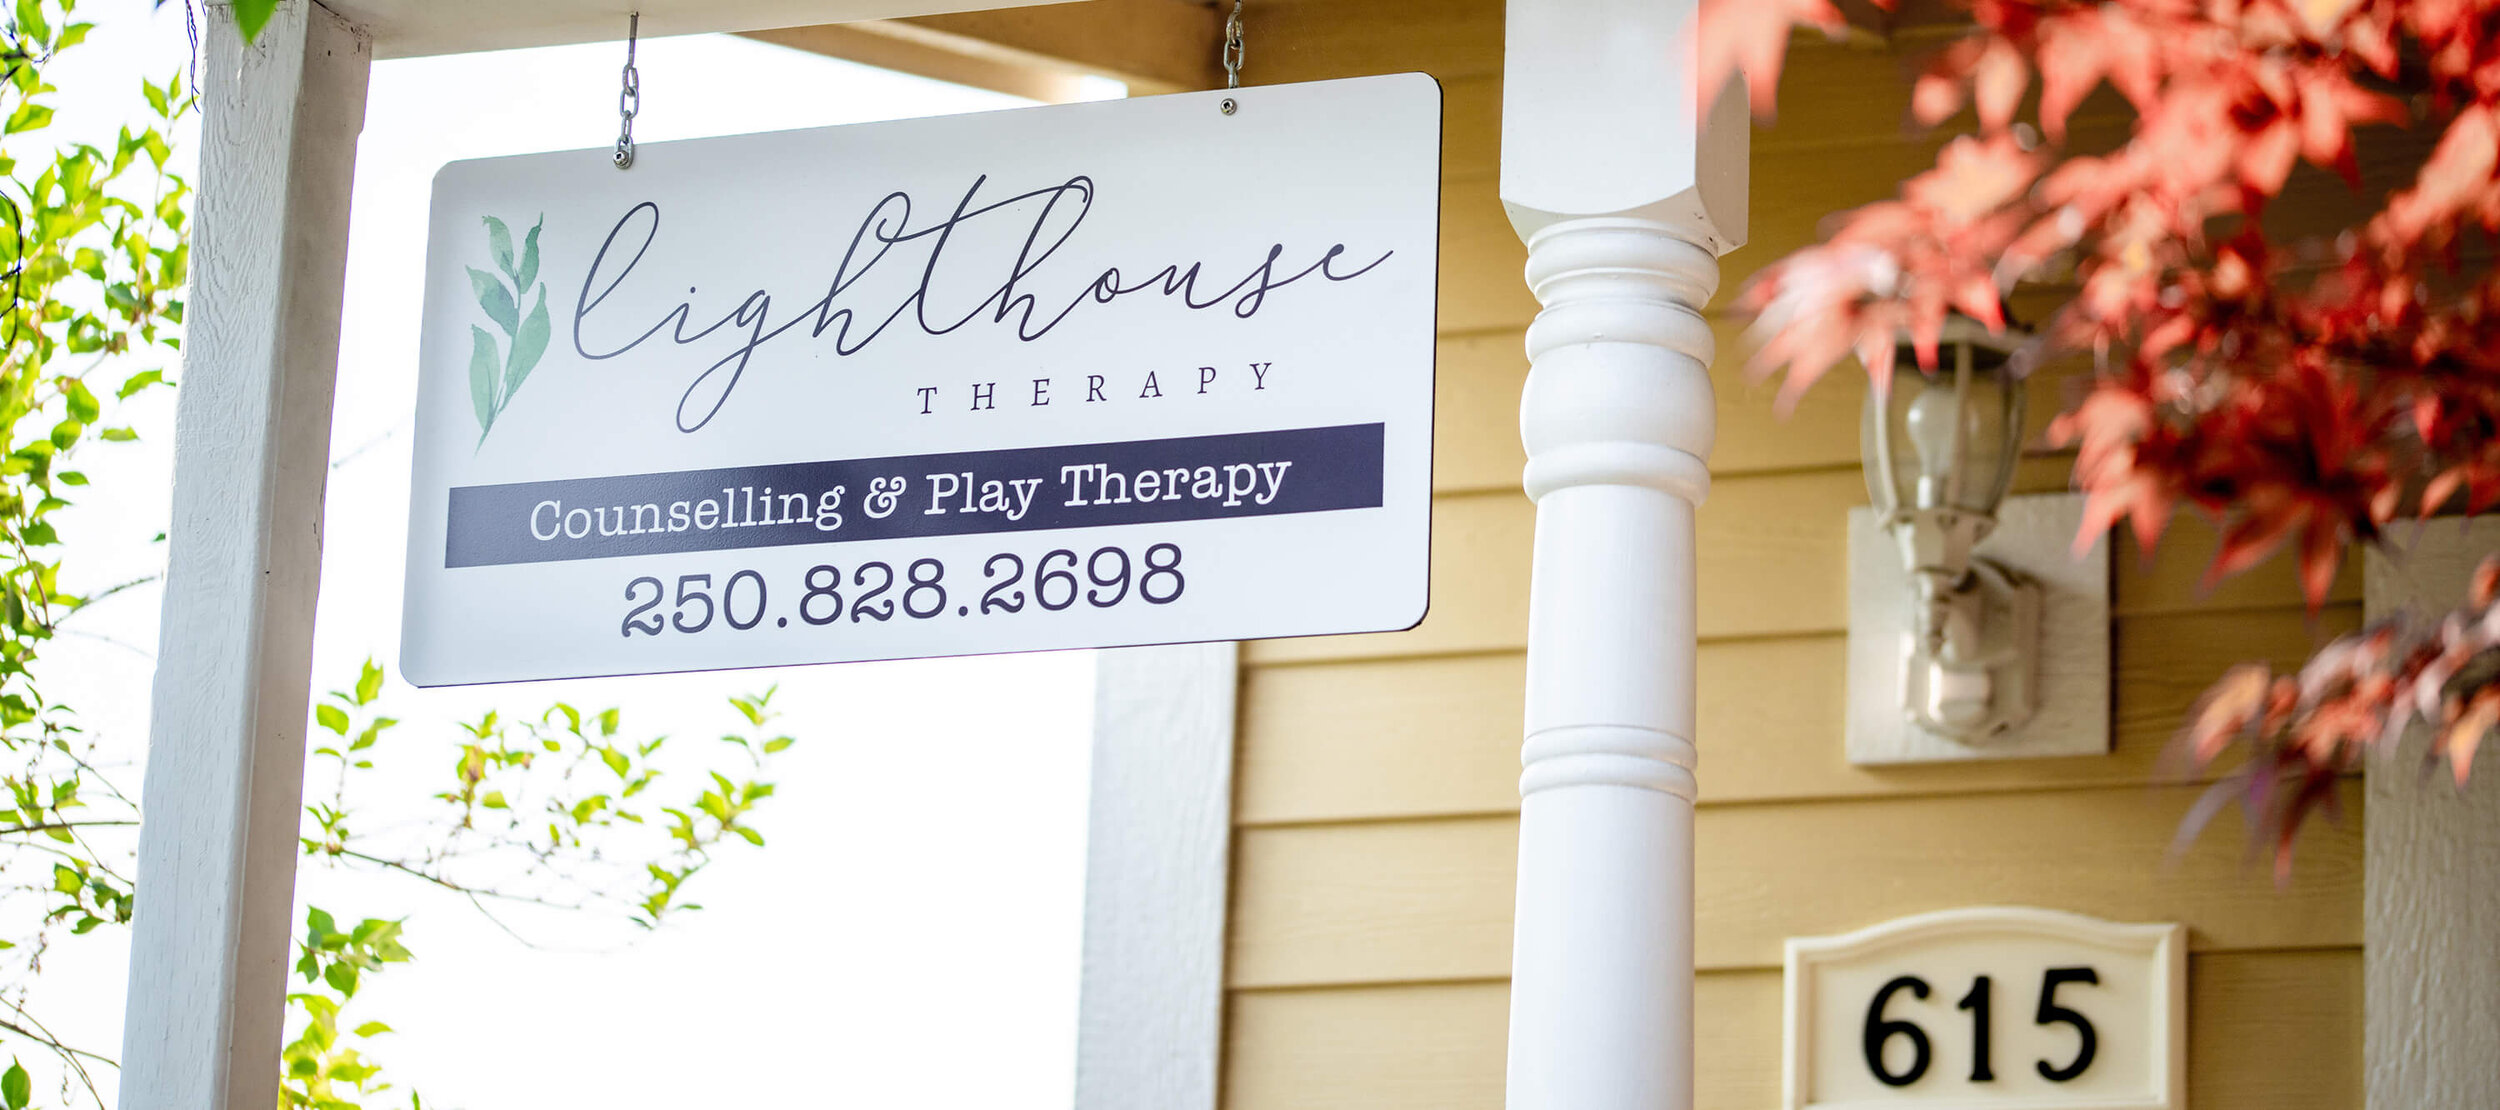 Lighthouse Therapy Childrens Therapy in Kamloops AB Canada.jpg